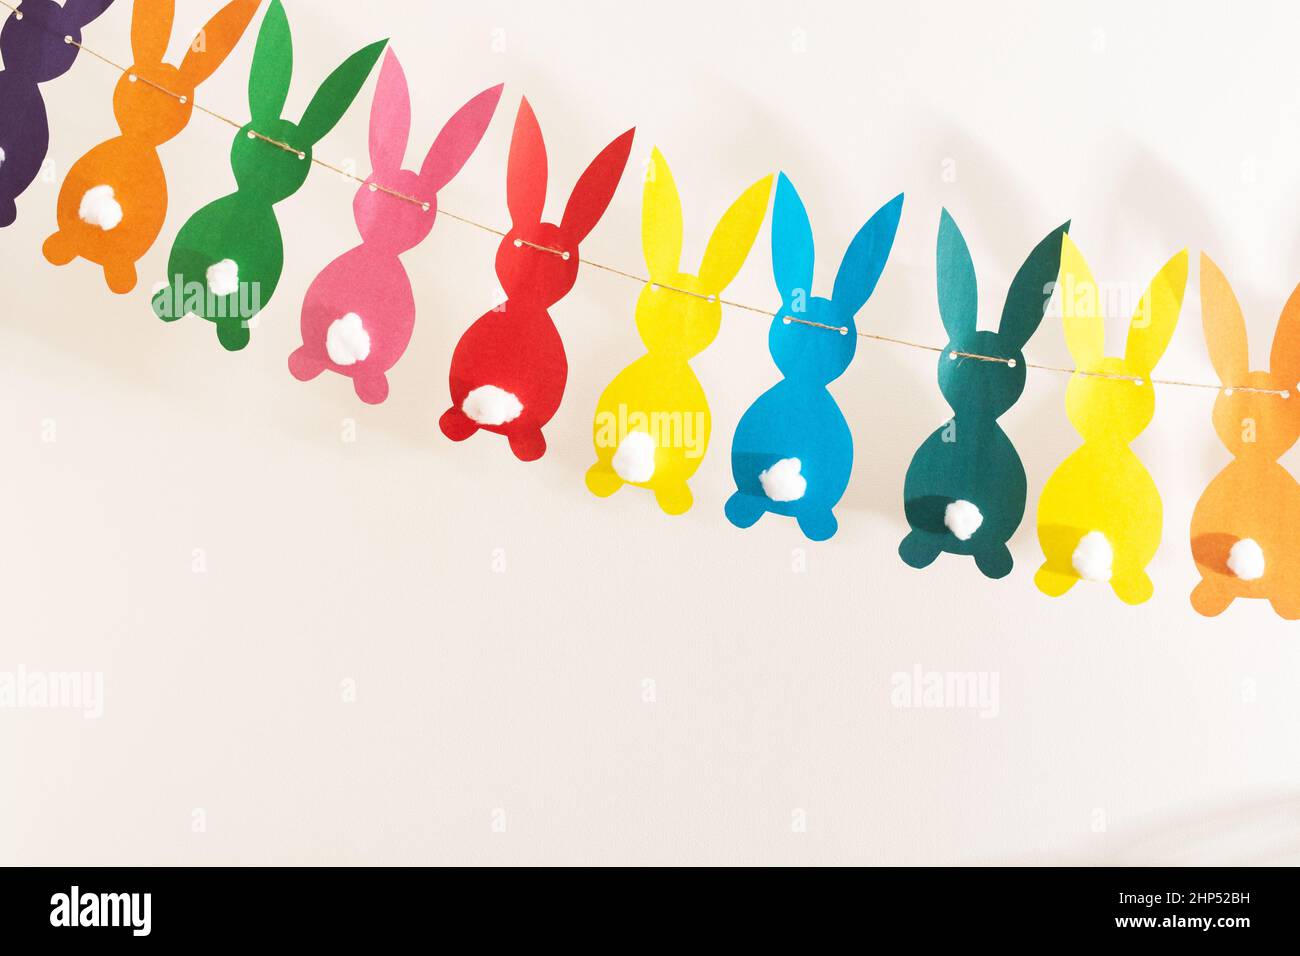 Handmade colorful paper garland with rabbits for Easter holiday Stock Photo